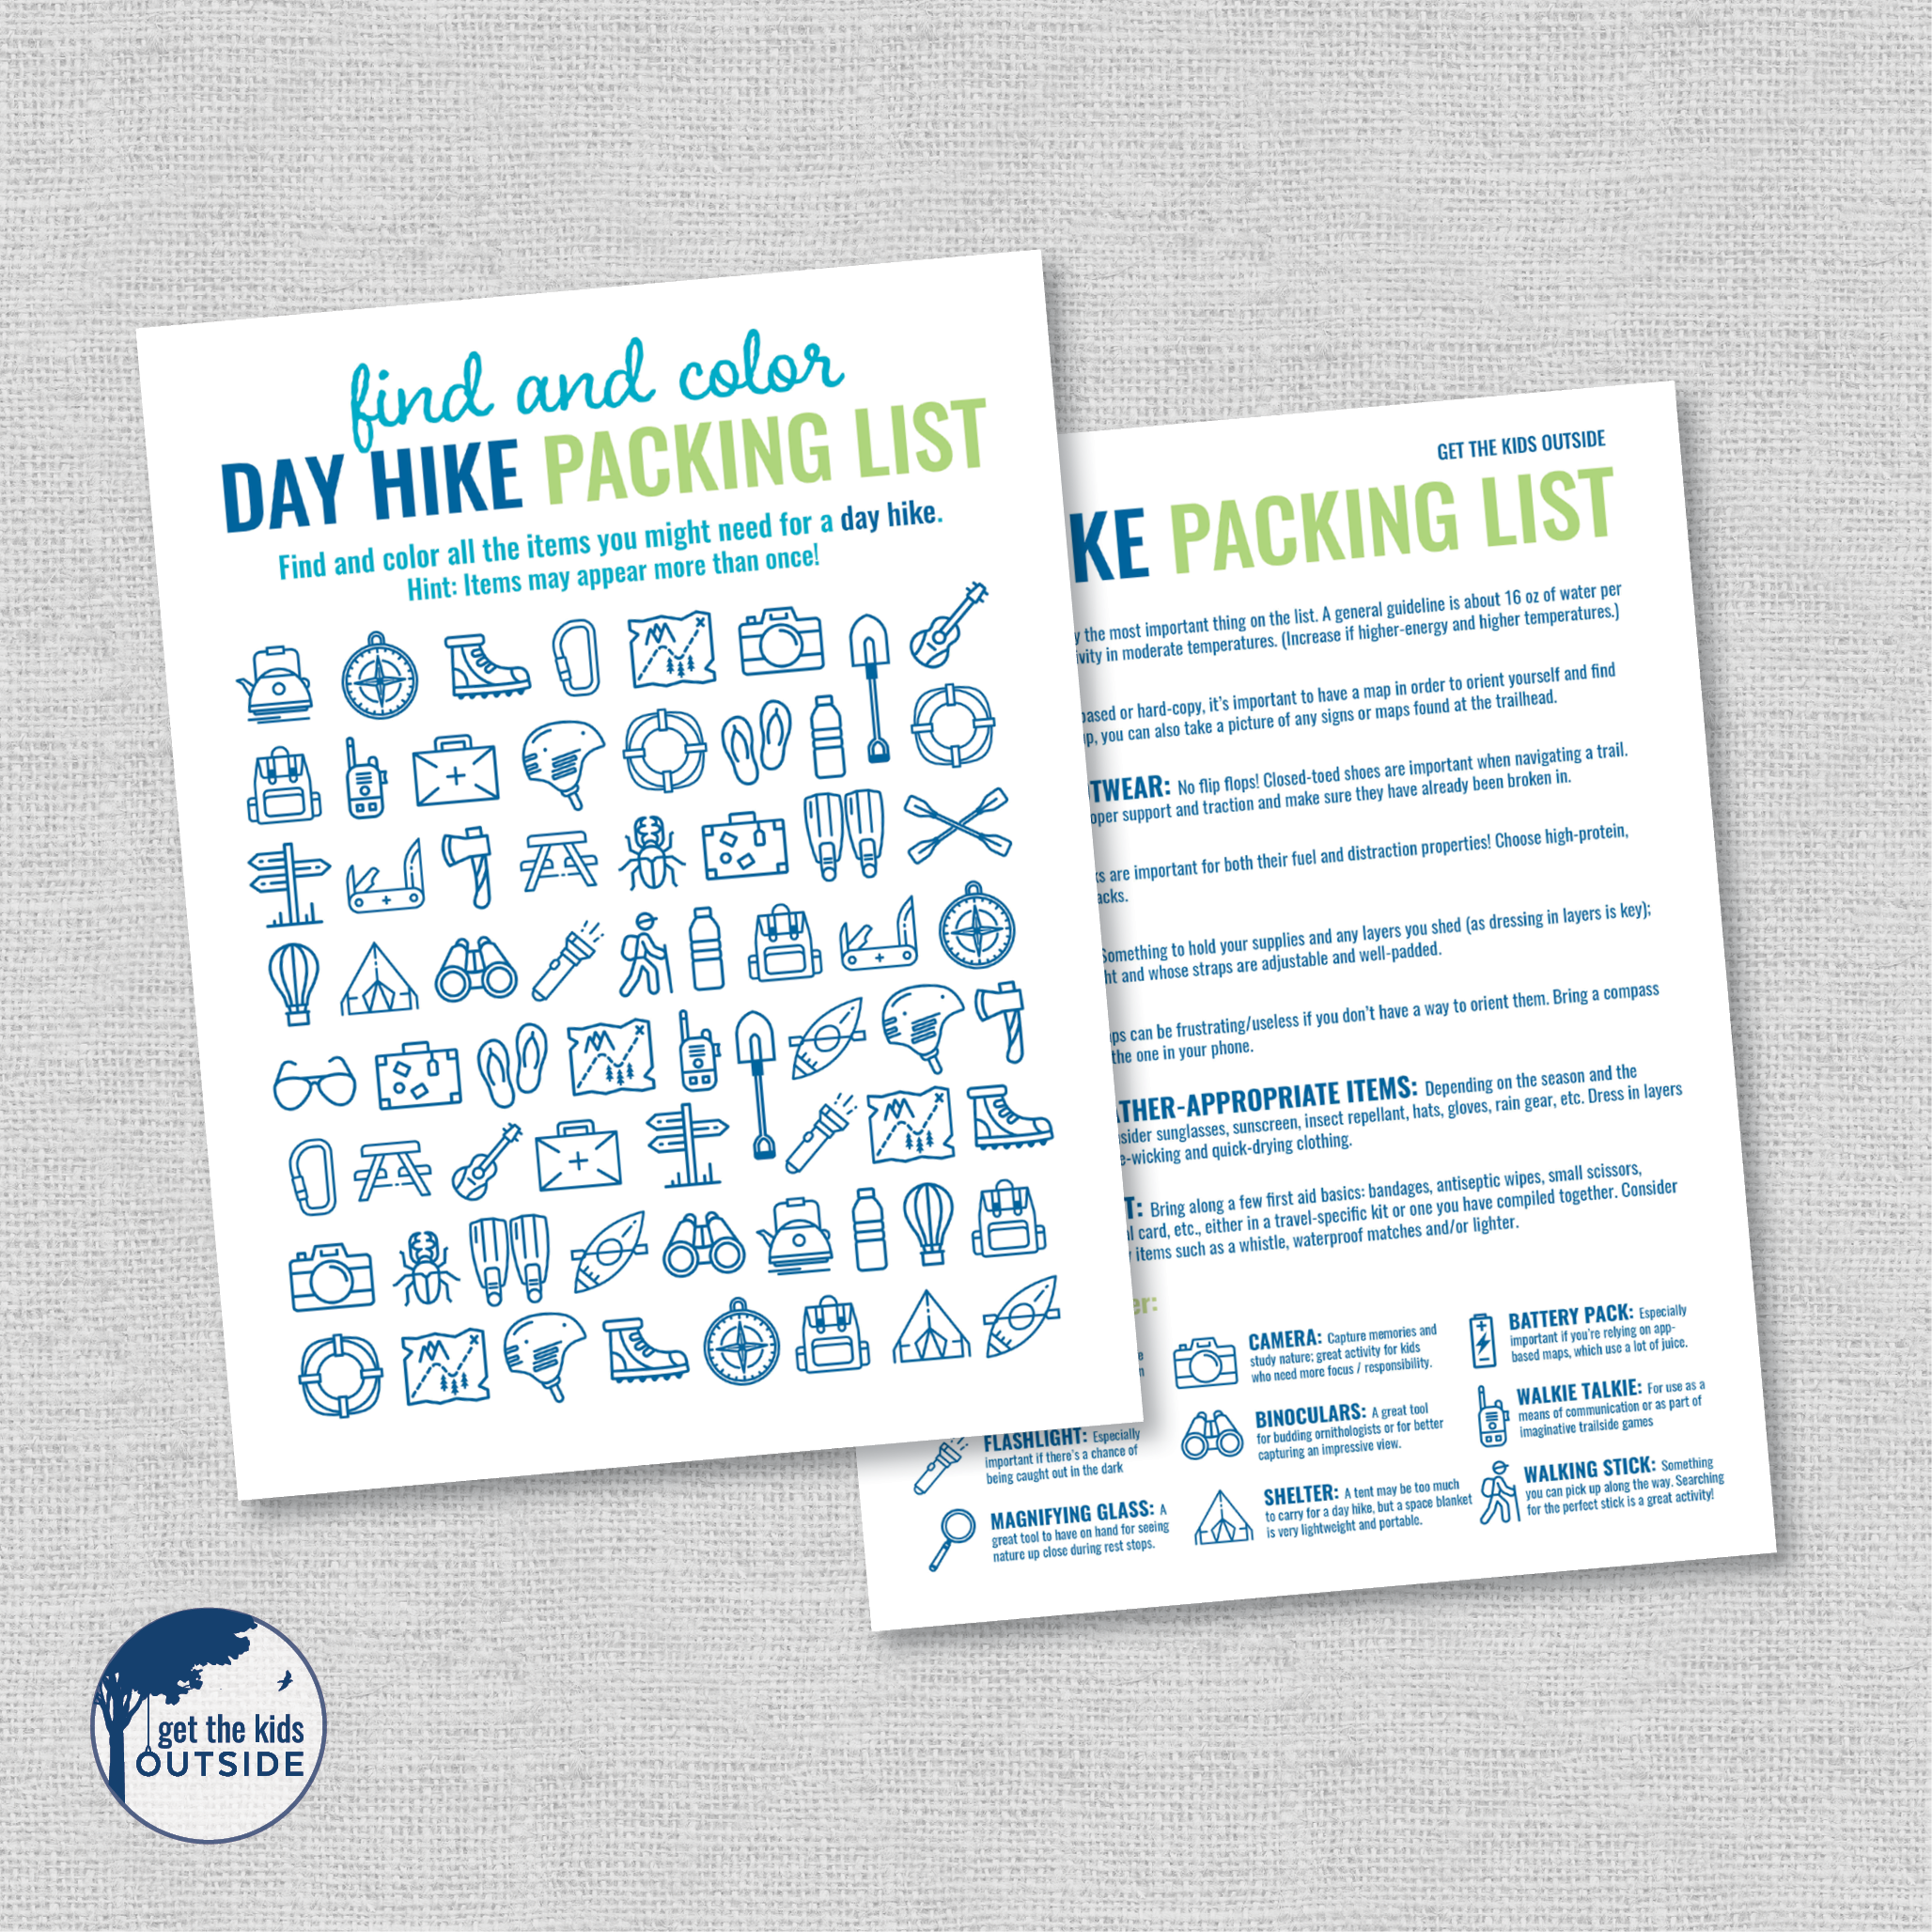 Find and Color: Day Hike Packing List – Get the Kids Outside